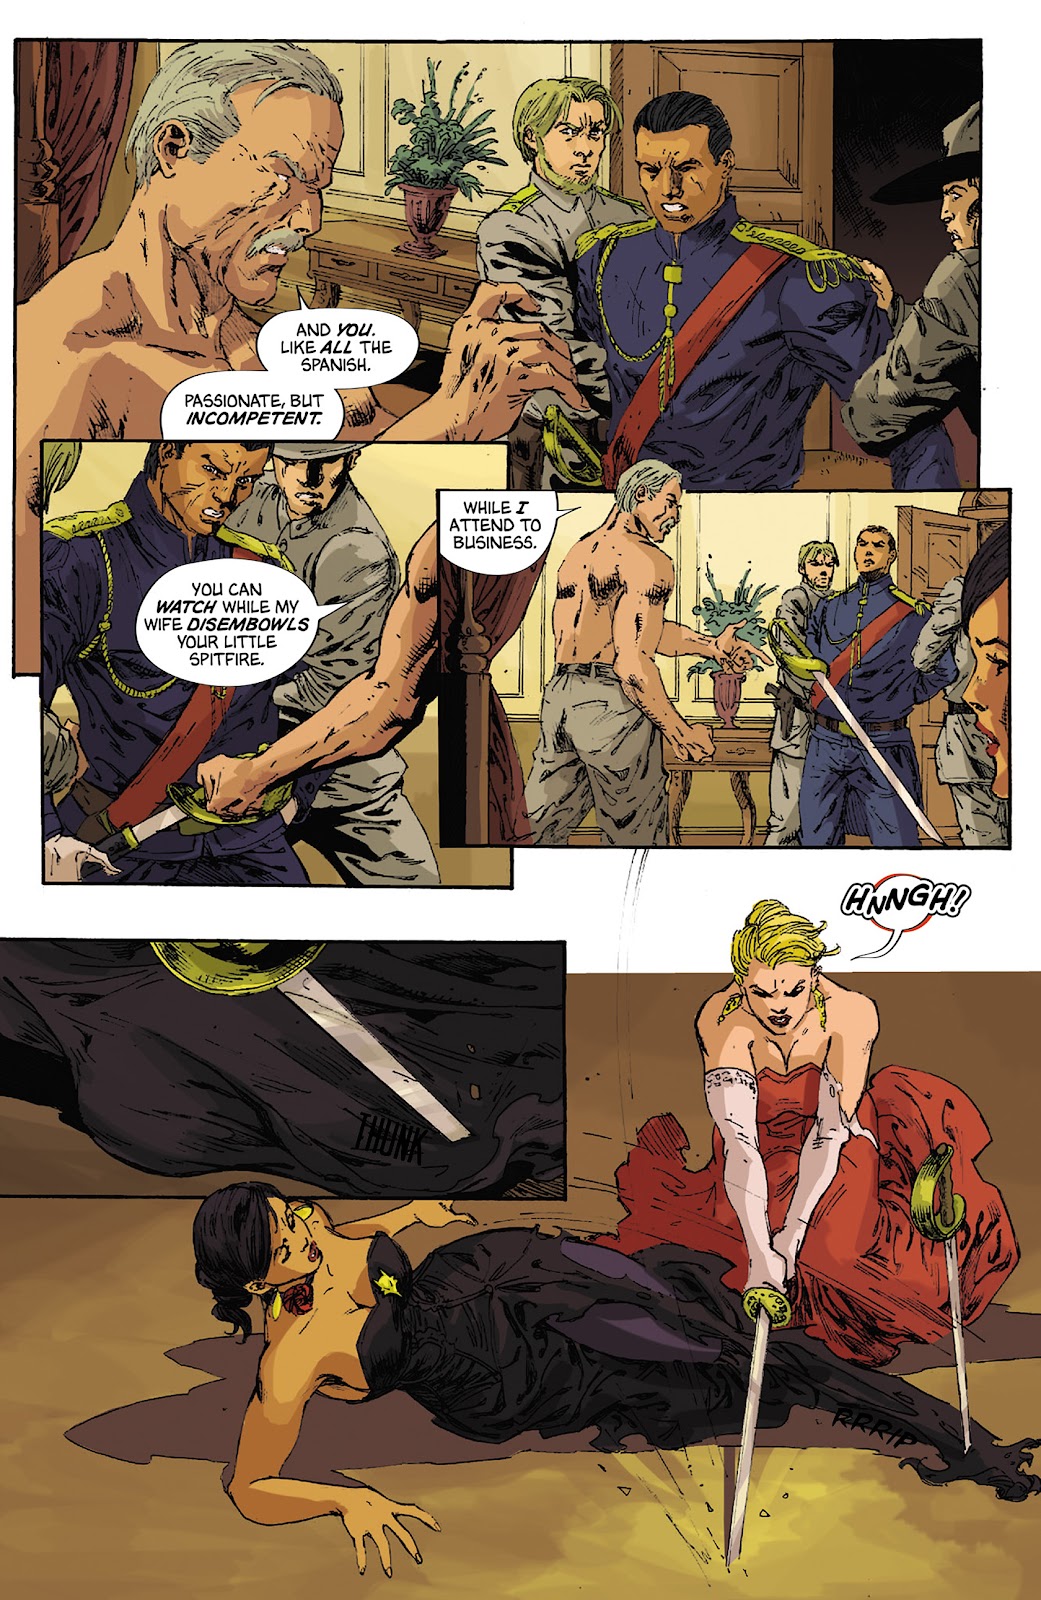 Lady Zorro (2014) issue 1 - Page 17